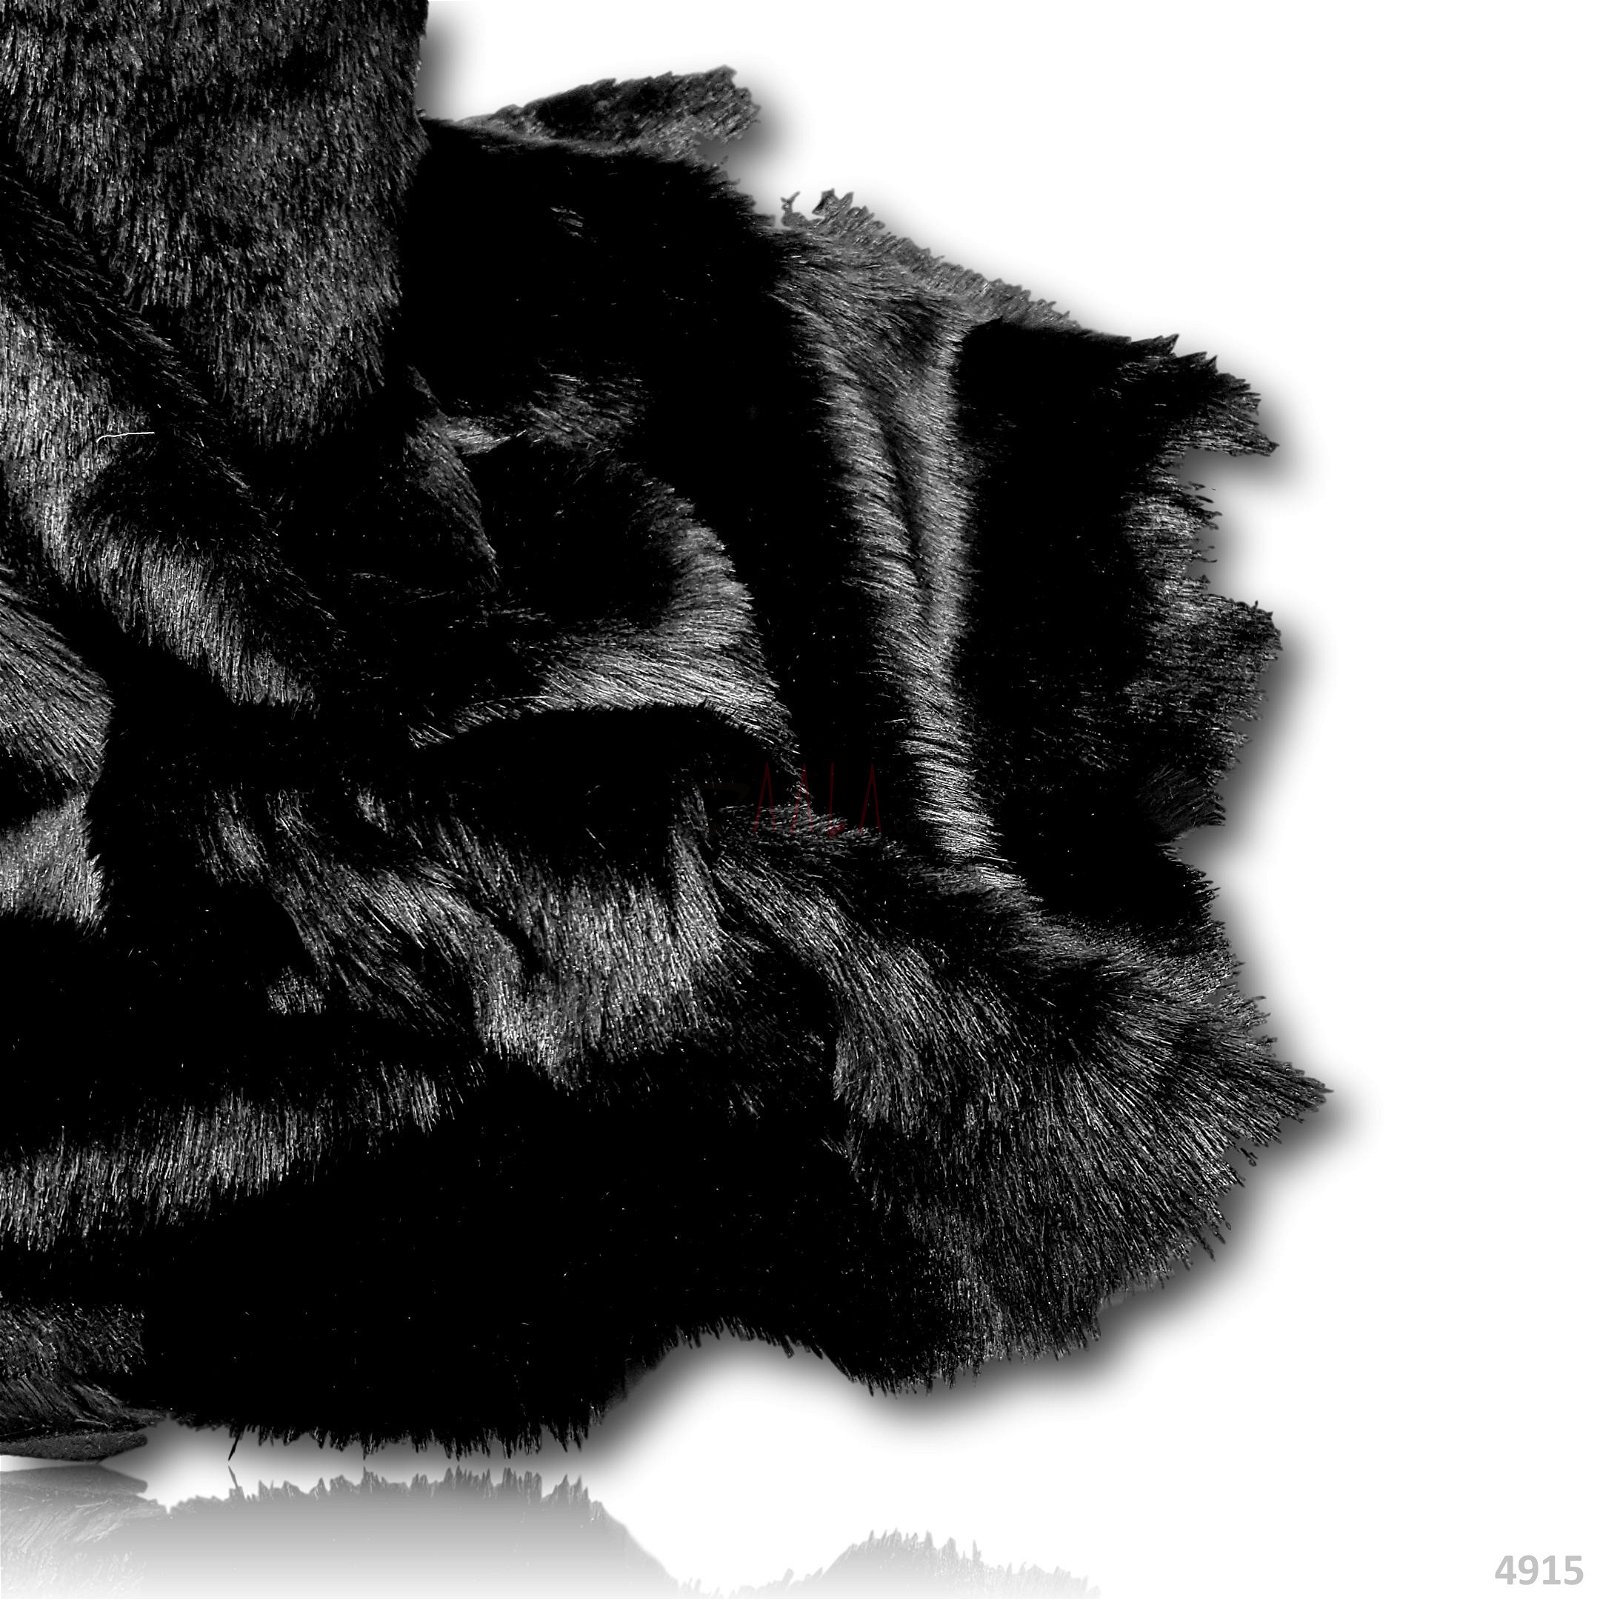 Fur Poly-ester 58 Inches Dyed Per Metre #4915